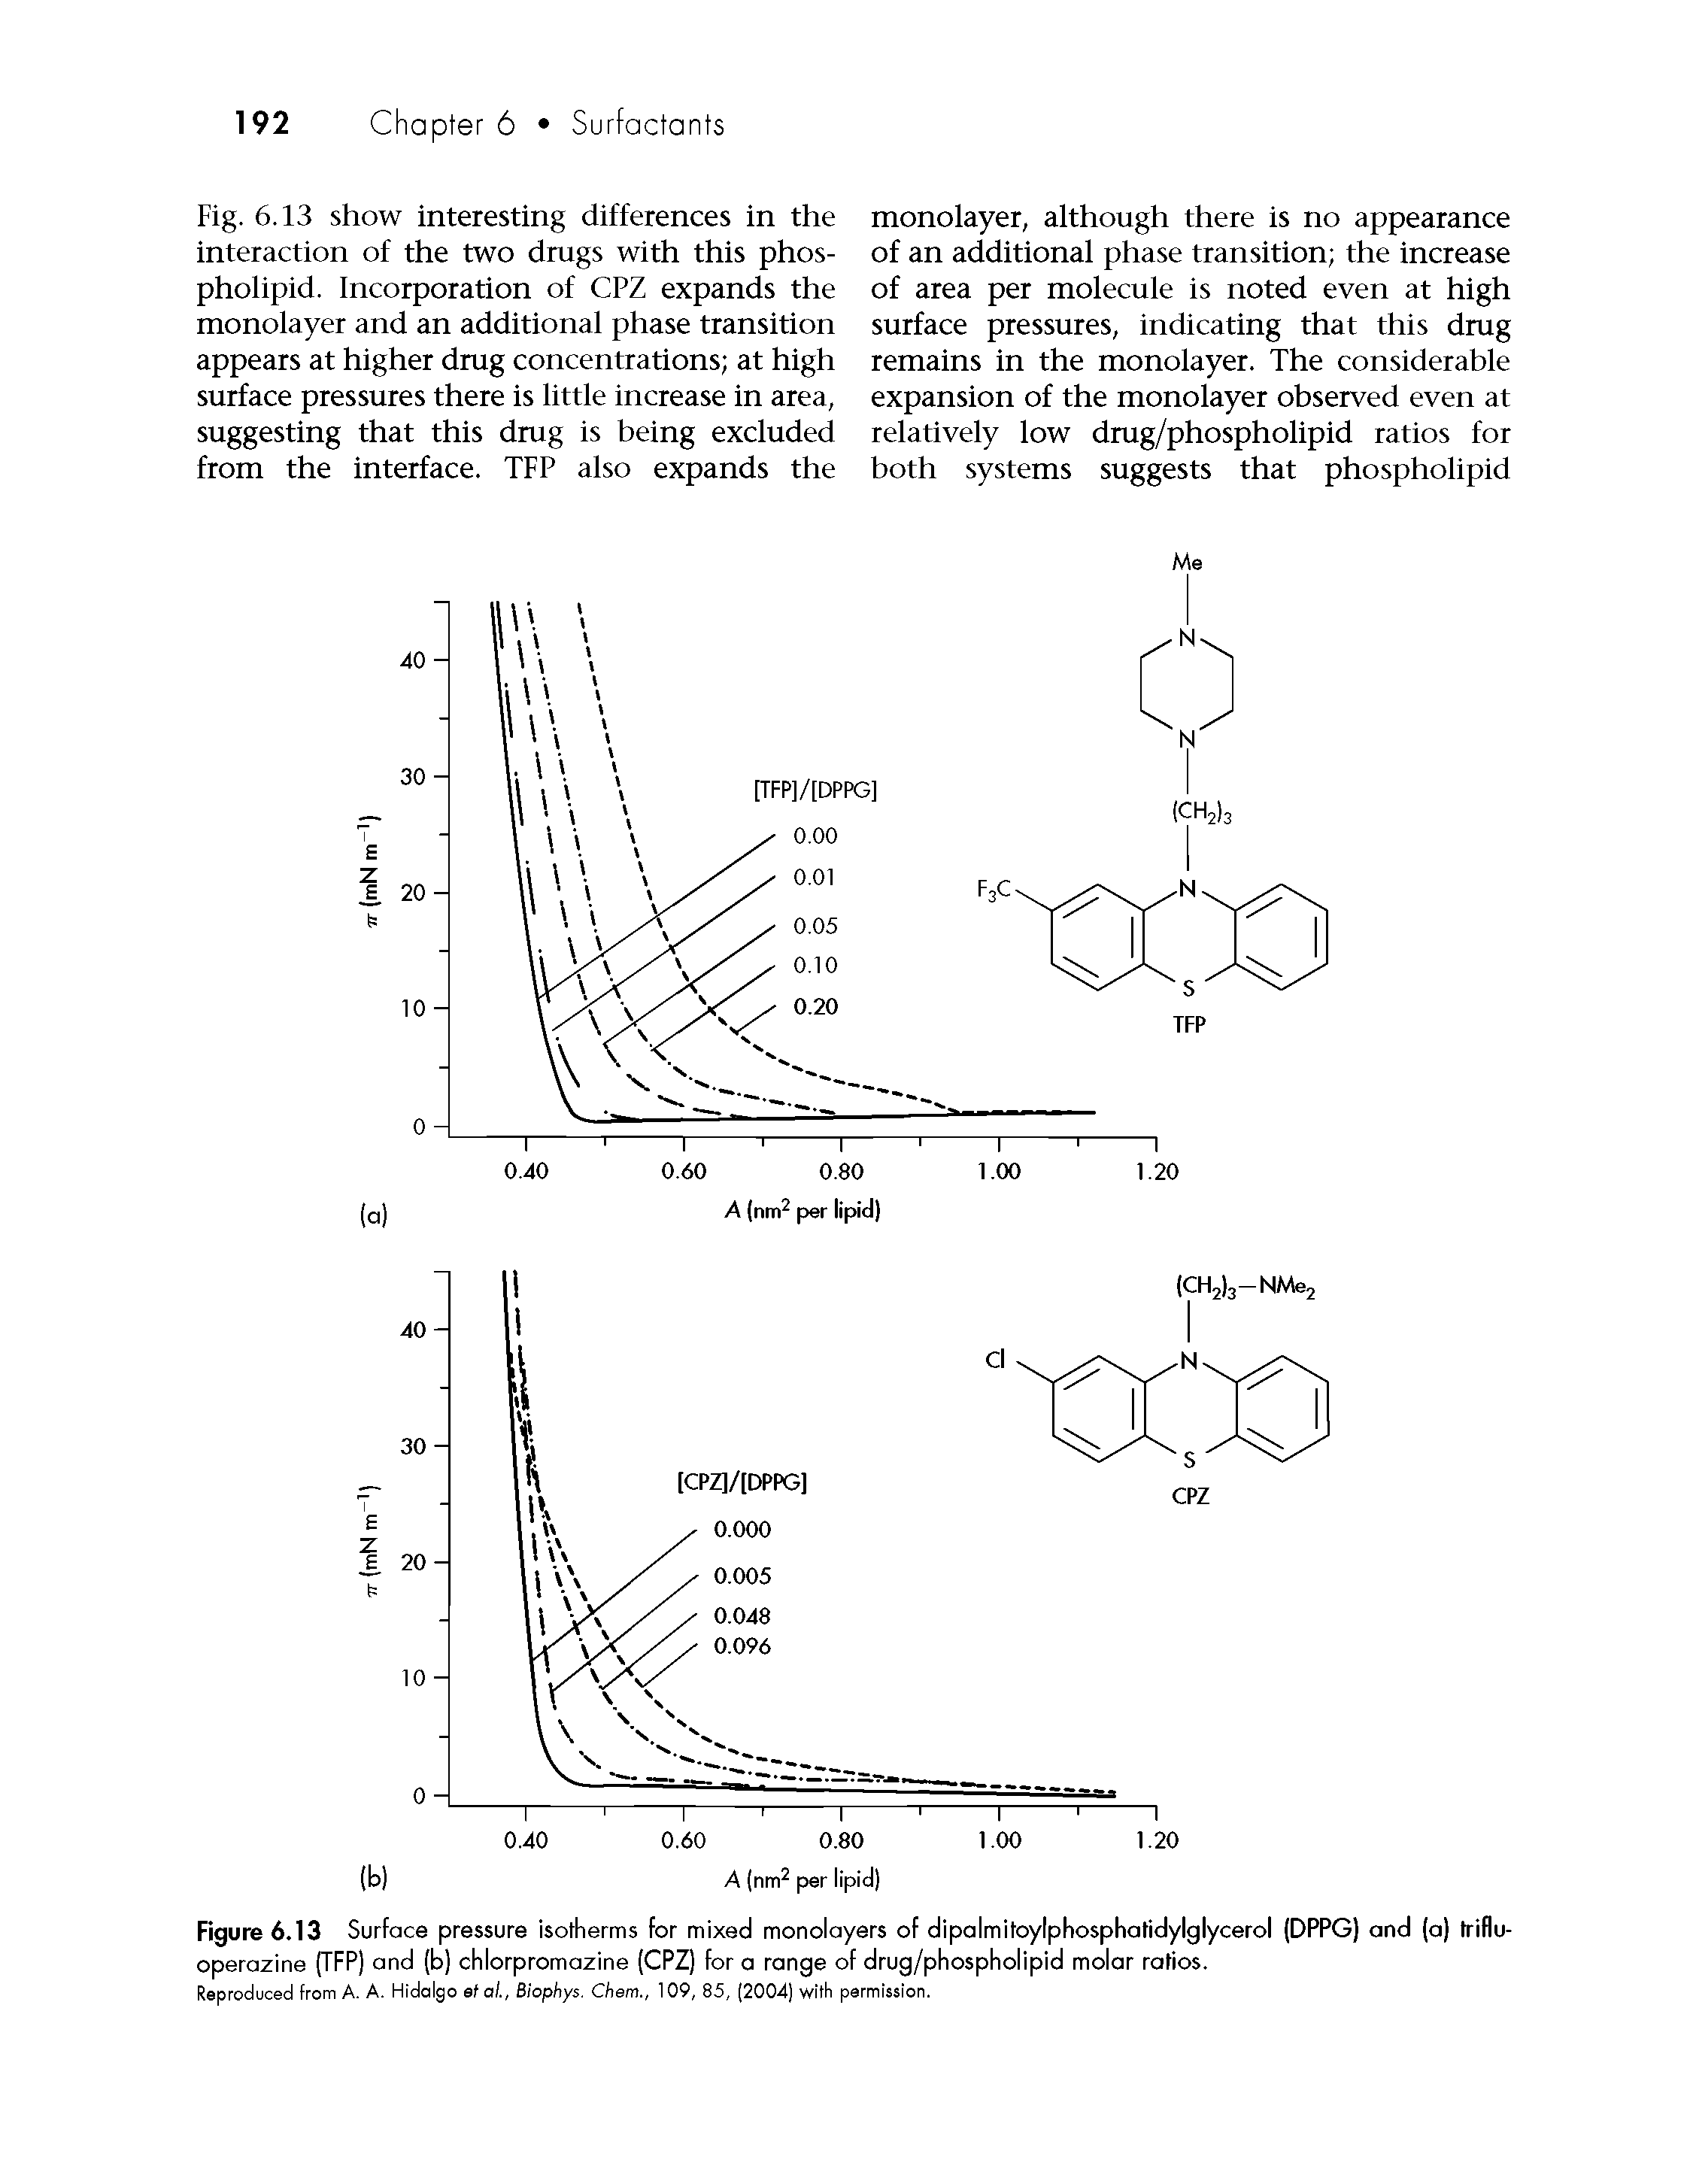 Figure 6.13 Surface pressure isotherms for mixed monolayers of dipalmitoylphosphatidylglycerol (DPPG) and (a) trifluoperazine (TFP) and (b) chlorpromazine (CPZ) for a range of drug/phospholipid molar ratios.